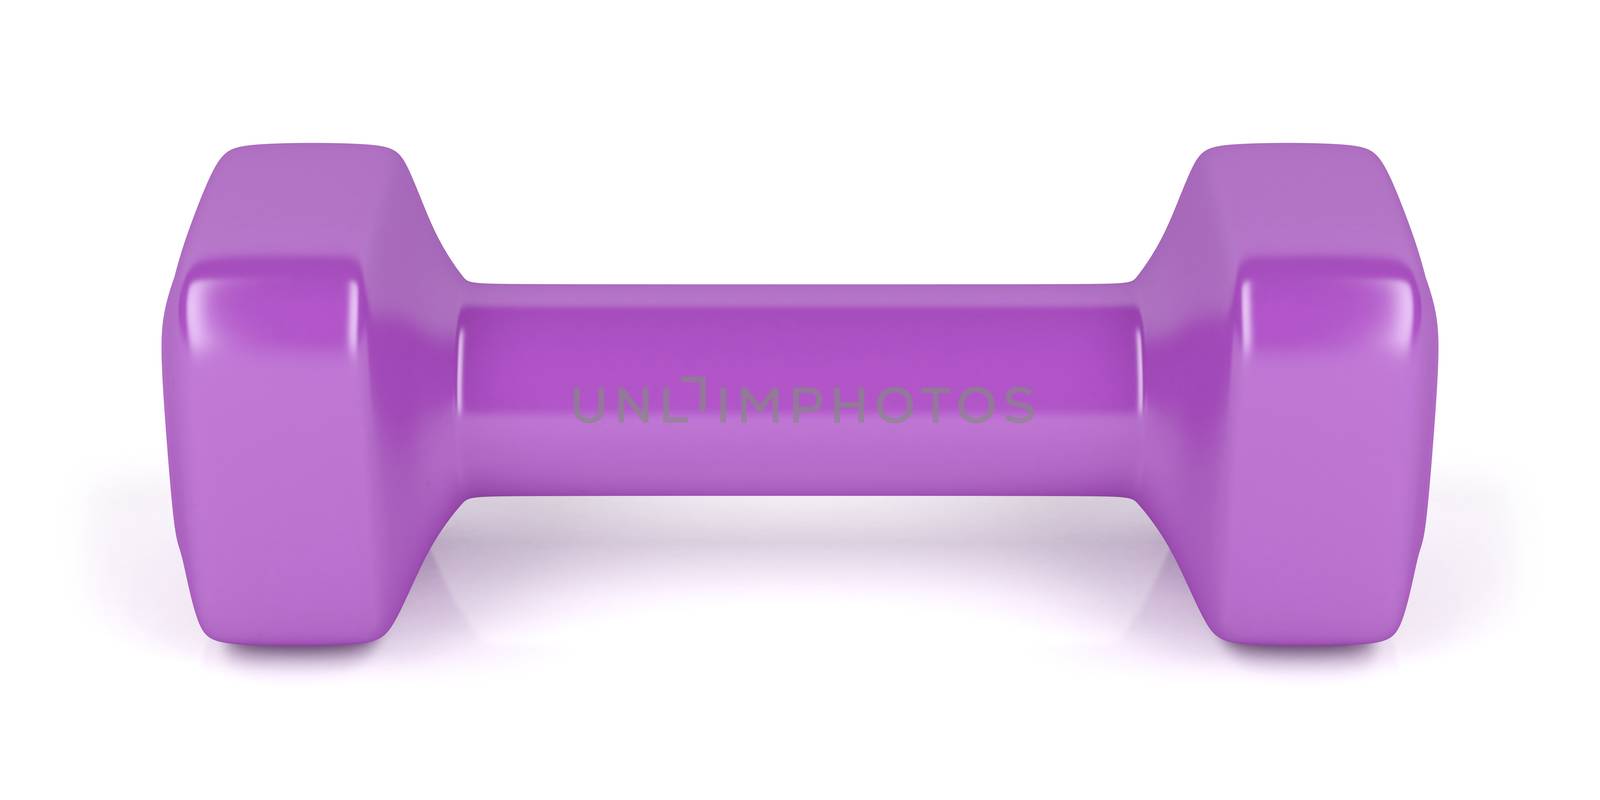 Front view of pink plastic dumbbell on shiny white background 